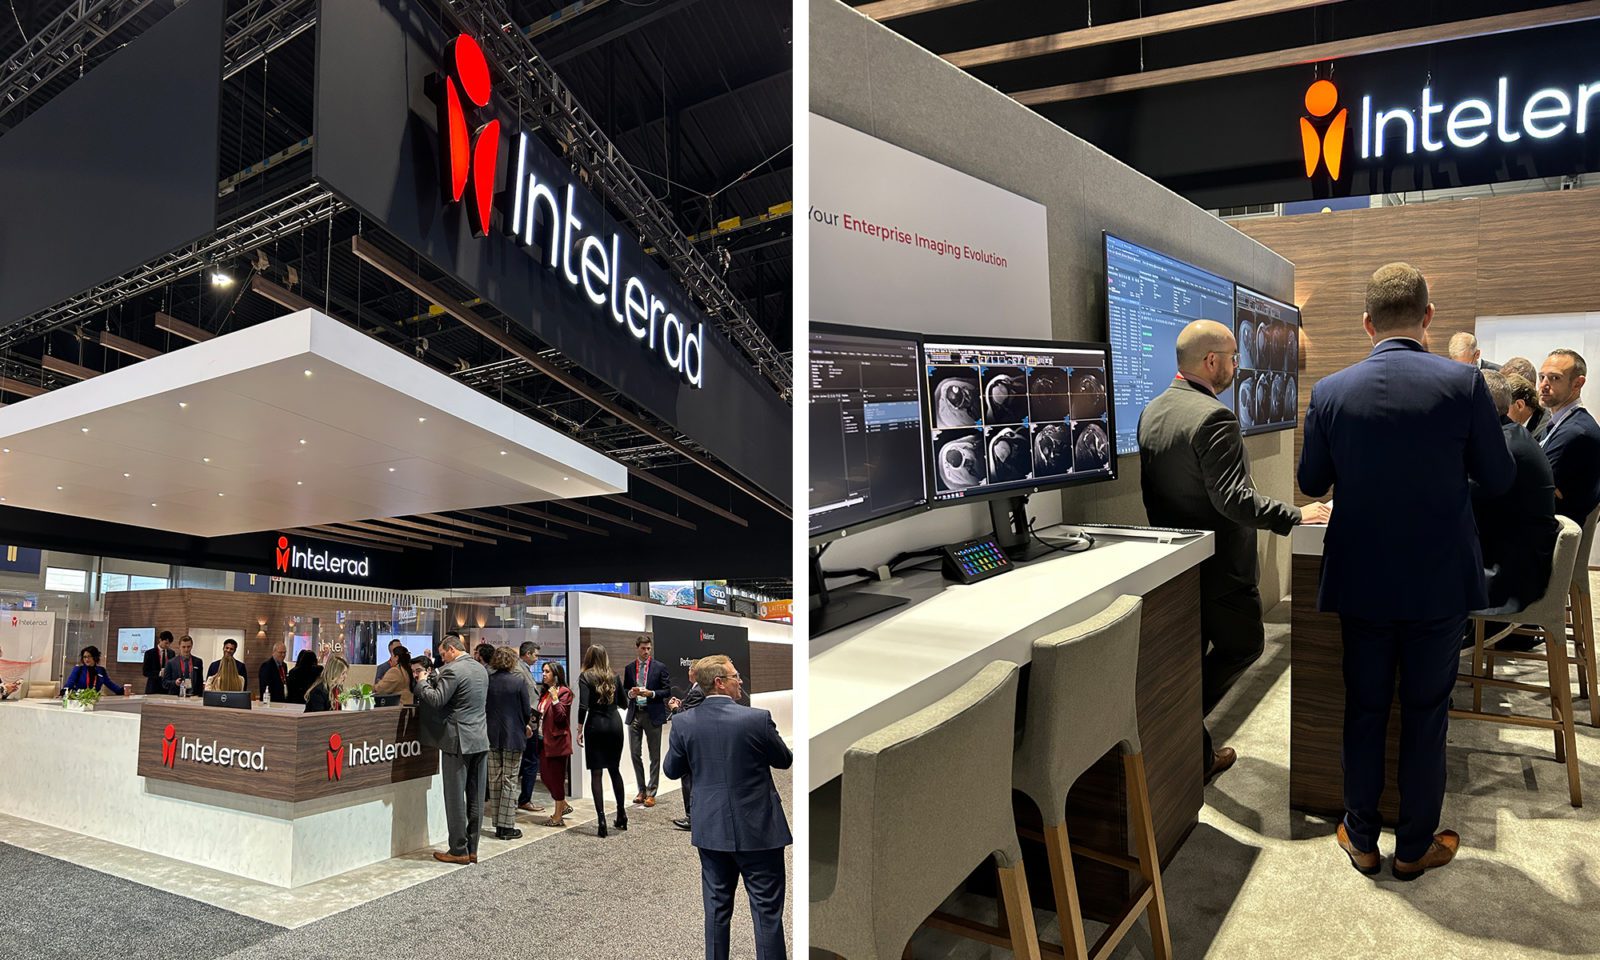 Intelerad's trade show booth, designed and built by EDE